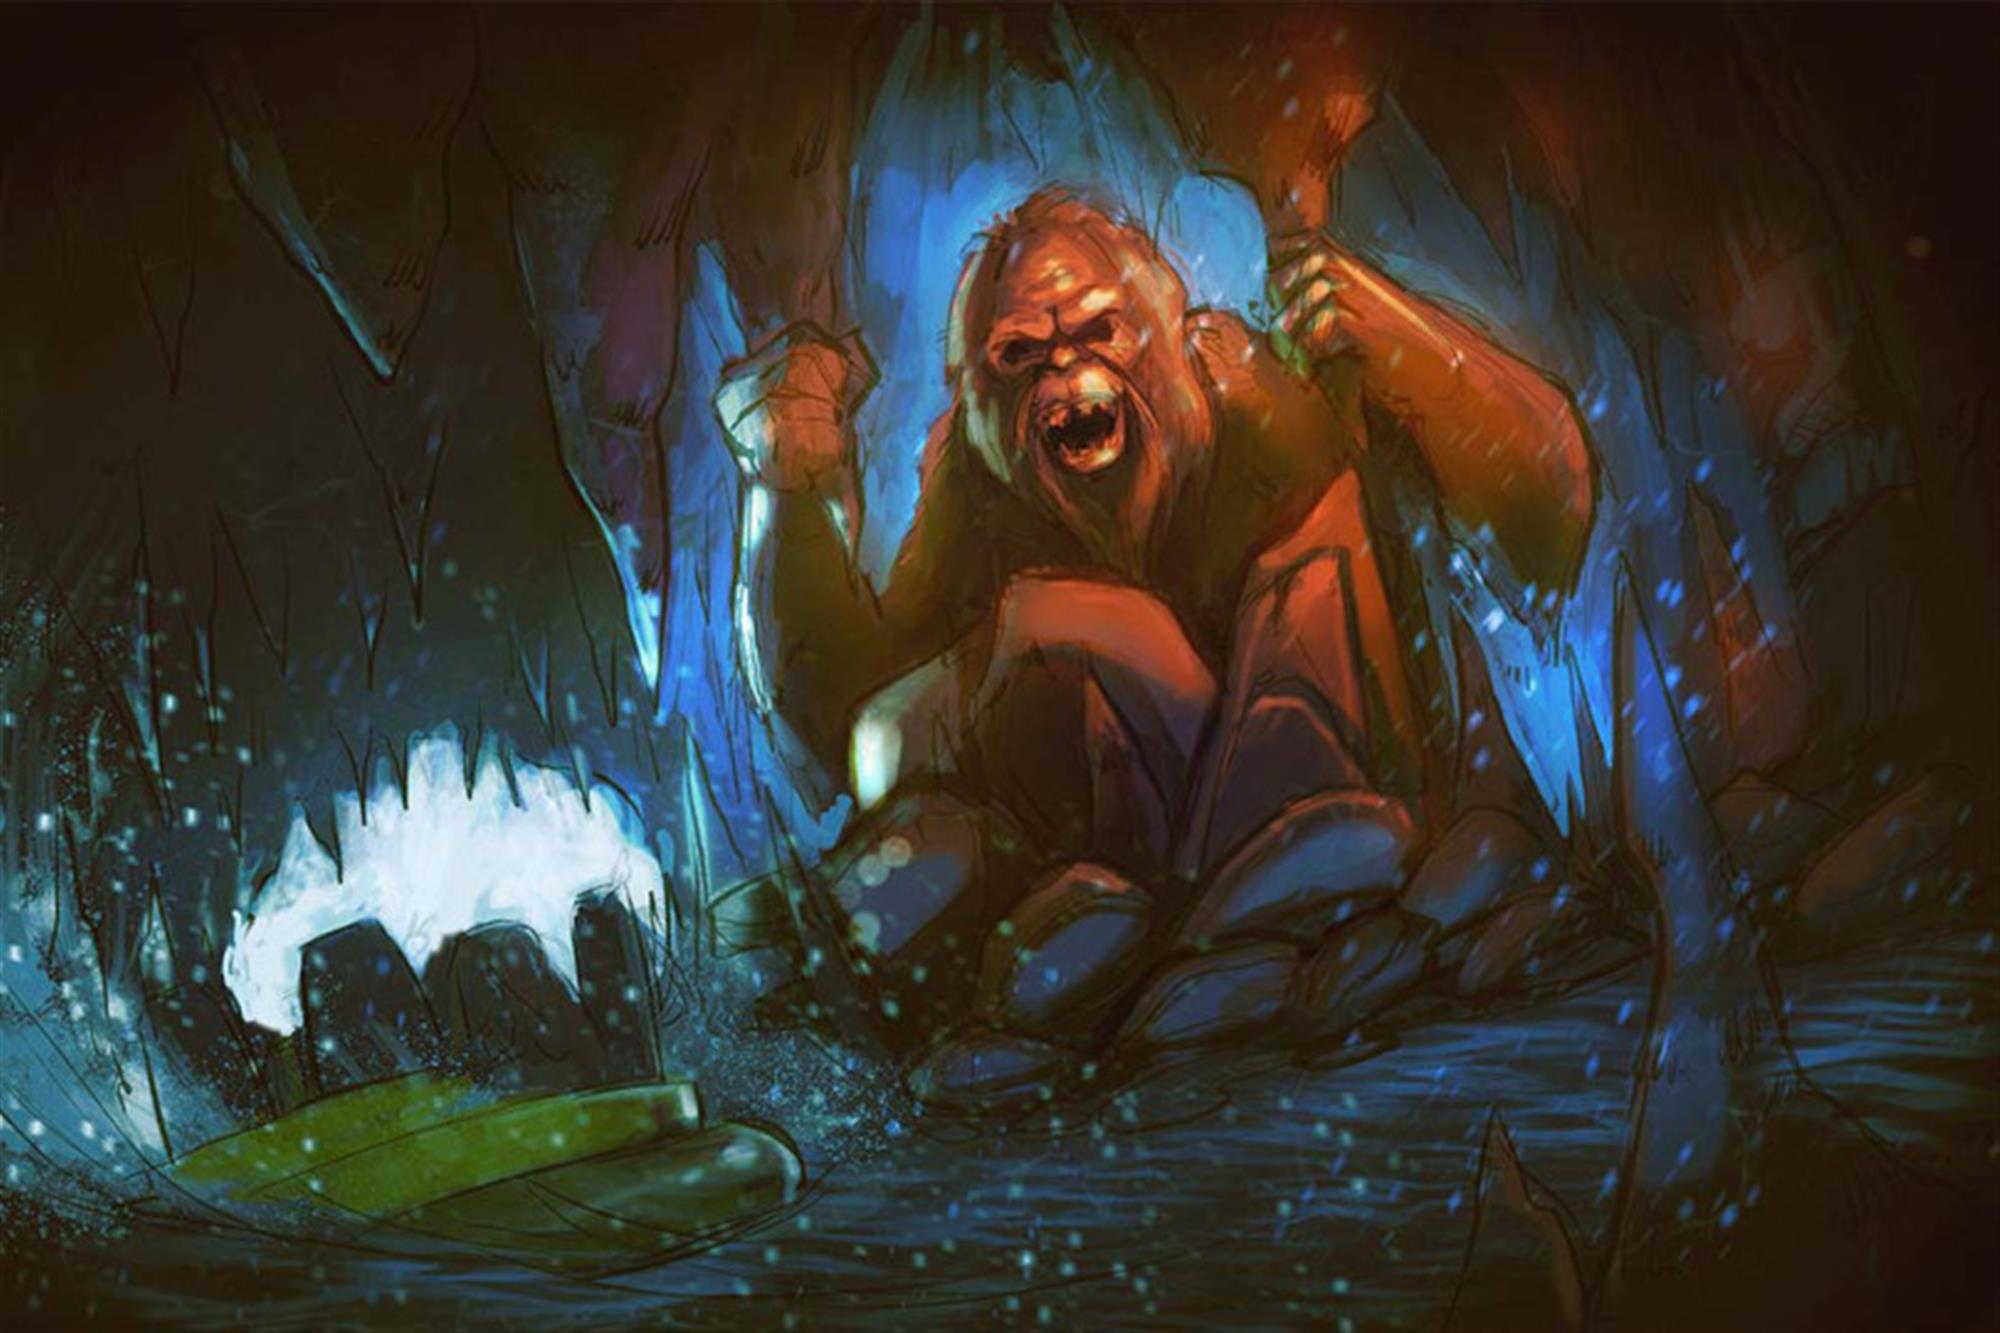 bigfoot-coming-to-reimagined-calico-river-rapids-attraction-at-knotts-berry-farm.jpeg